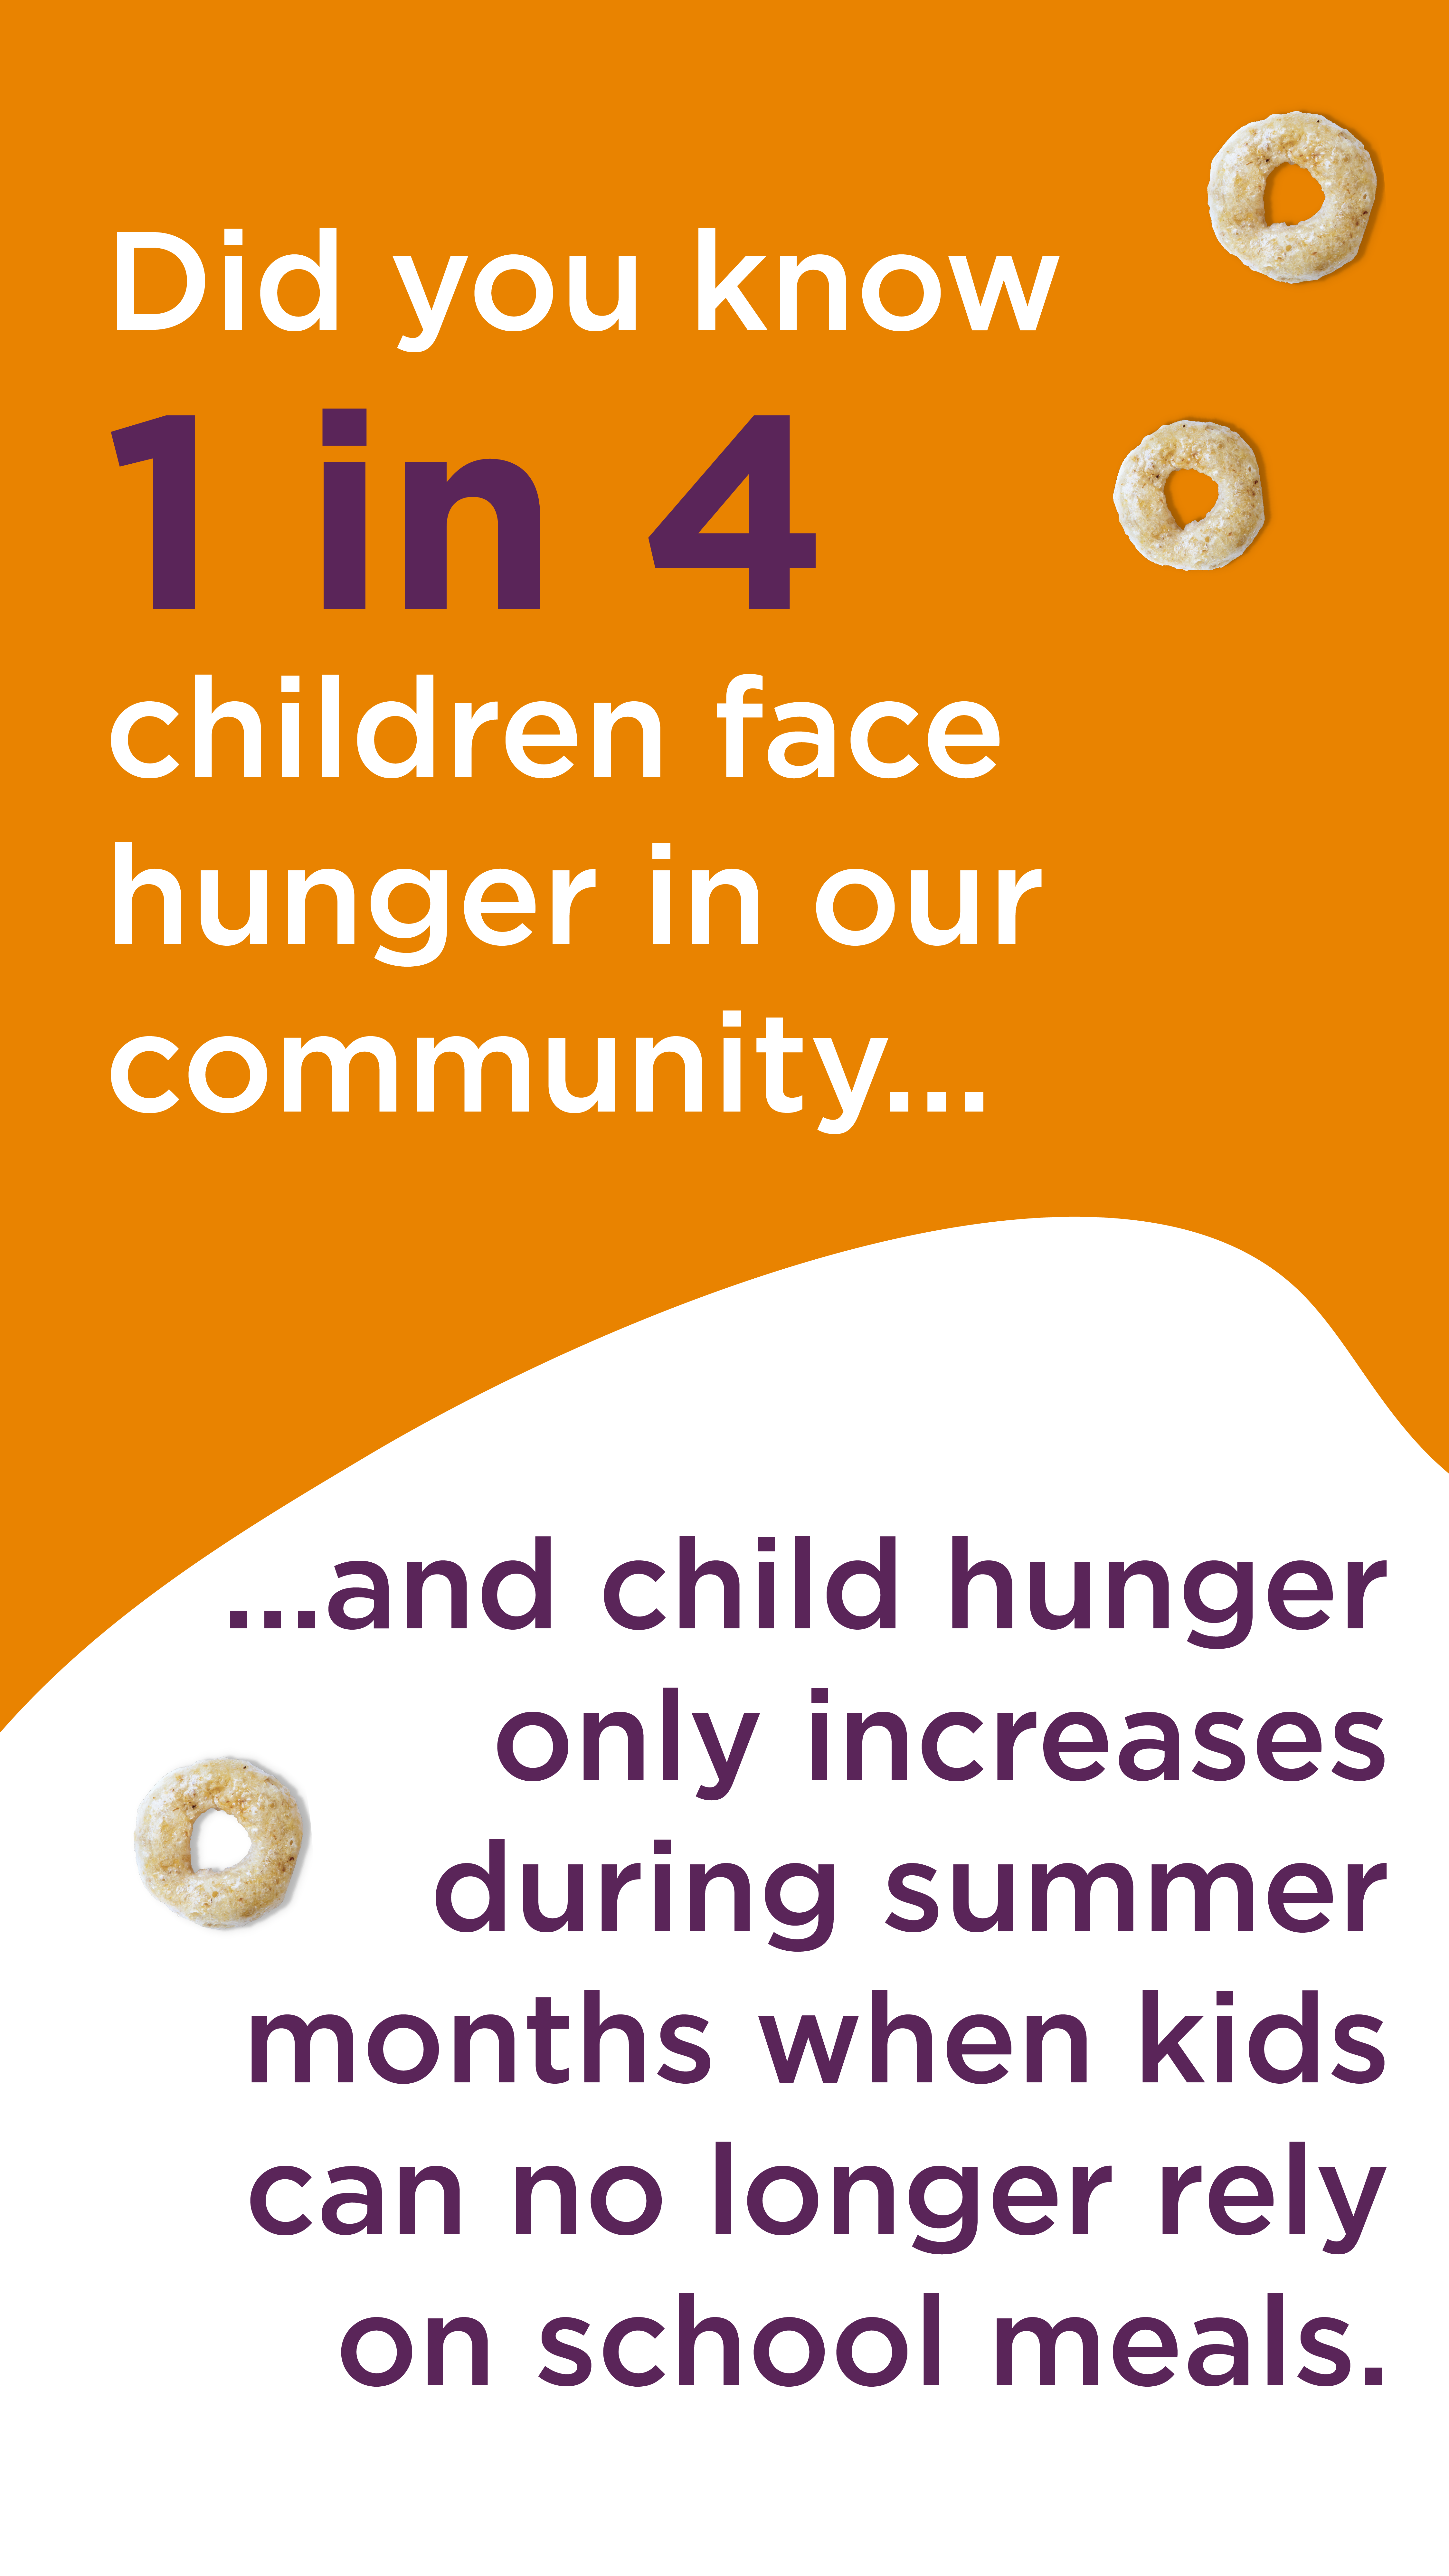 1 in 4 children face hunger in our community...and that only increase during summer months when kids can no longer rely on school meals